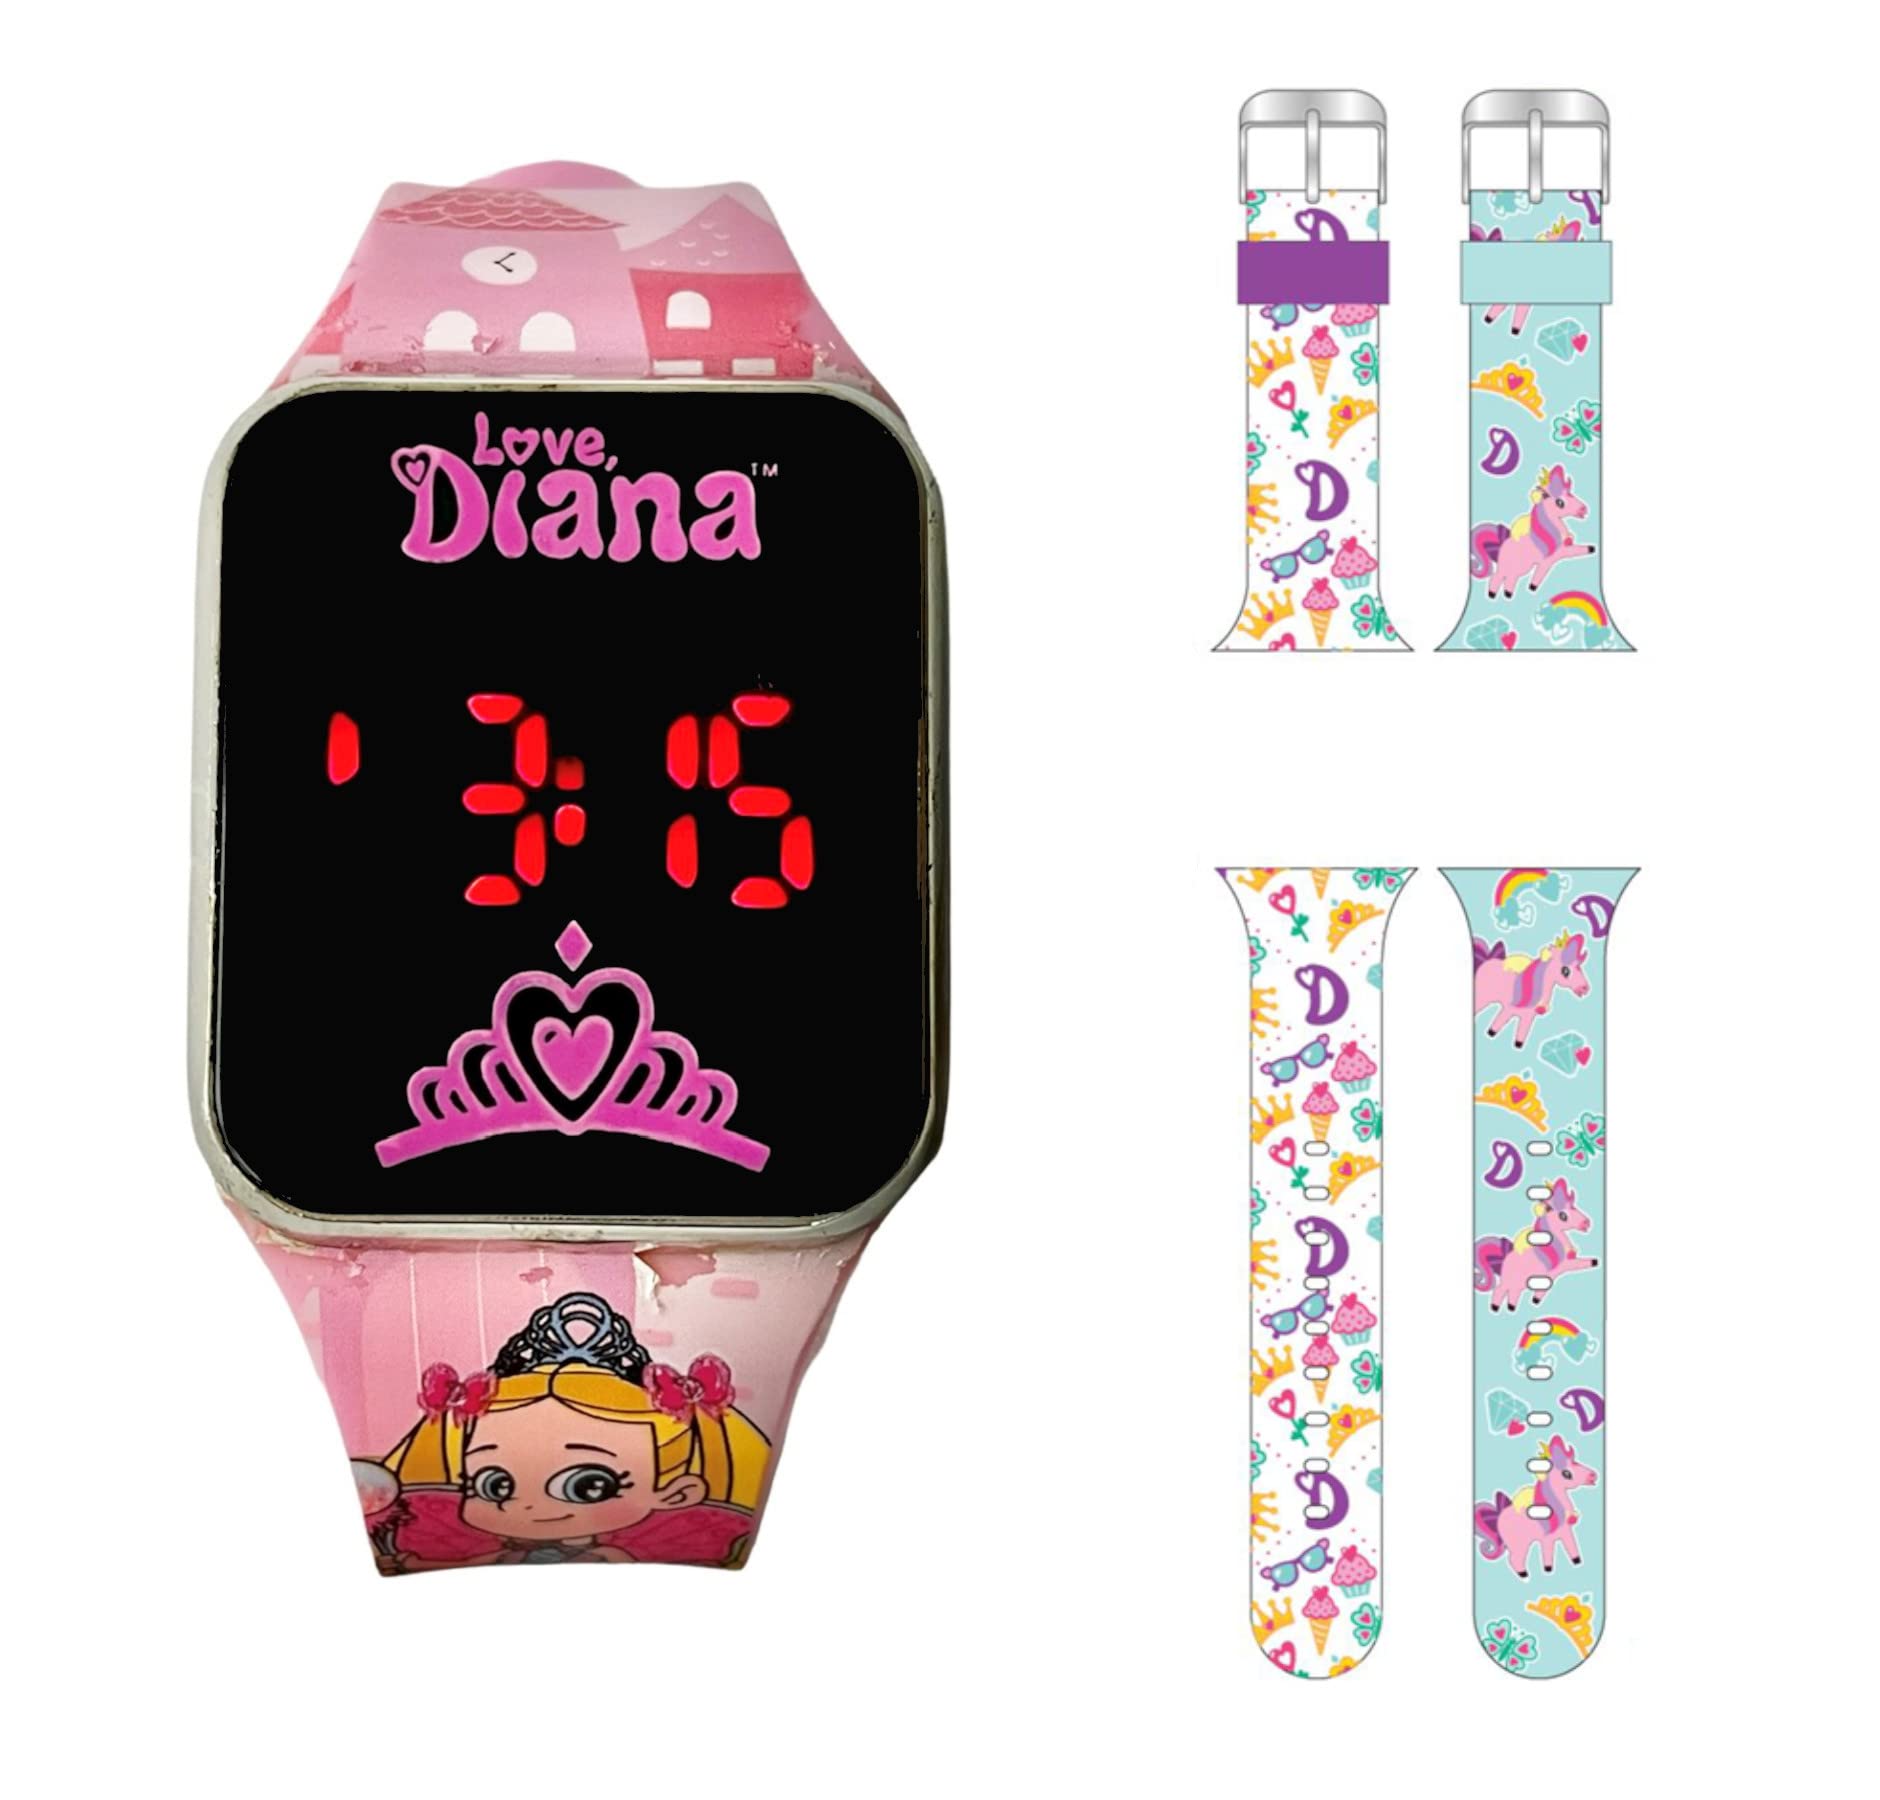 Accutime Kids Love, Diana Pink Digital LED Quartz Childrens Wrist Watch for Girls, Boys, Toddlers with Multicolor Graphic Interchangeable Straps (Model: LDA40002AZ)